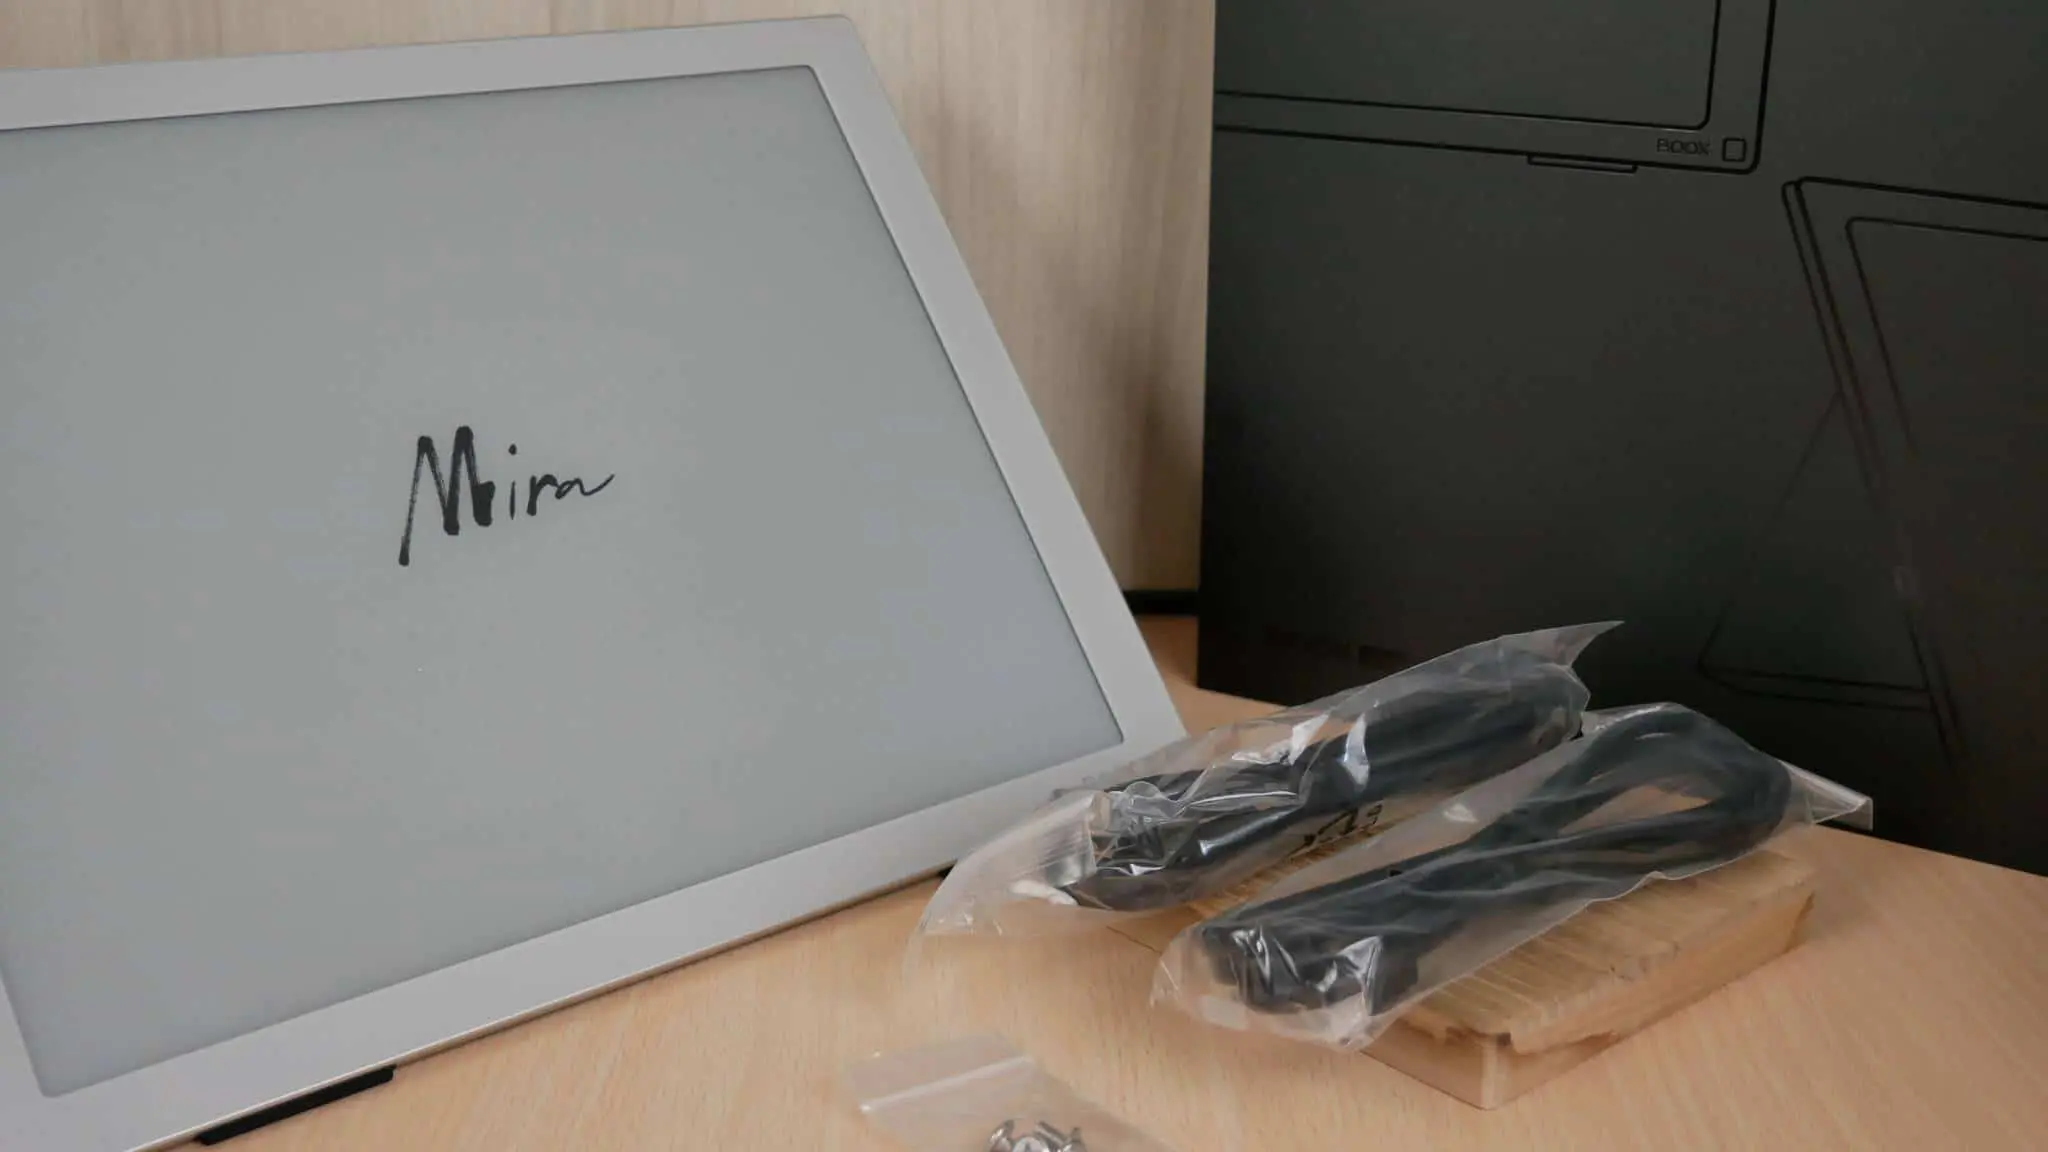 First Look at the Onyx Boox Mira 13.3 inch E INK Monitor - Good e